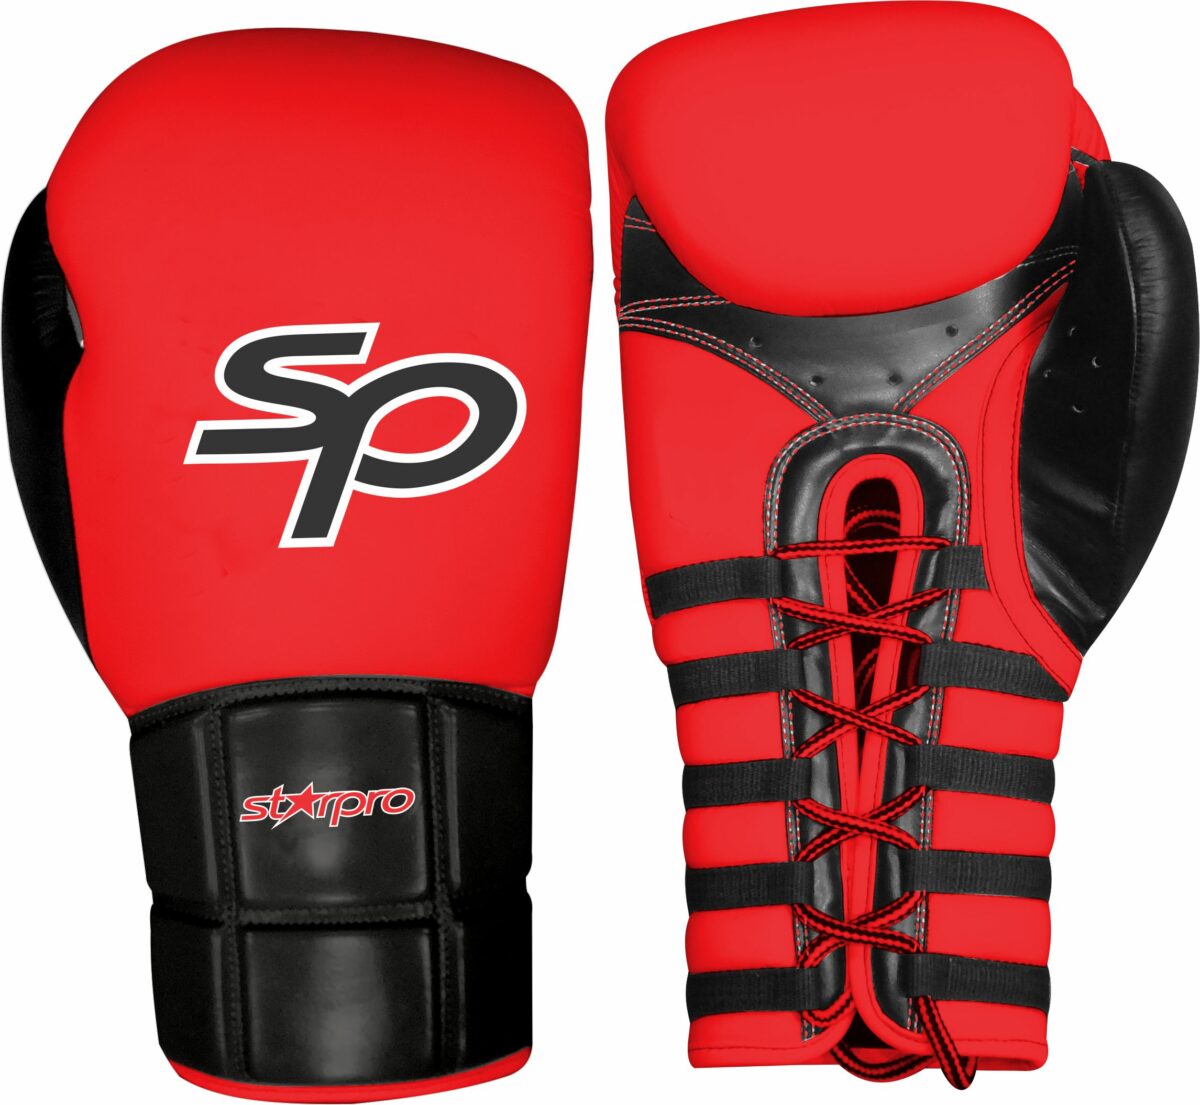 Safety Sparring Boxing Glove “Layered Foam”